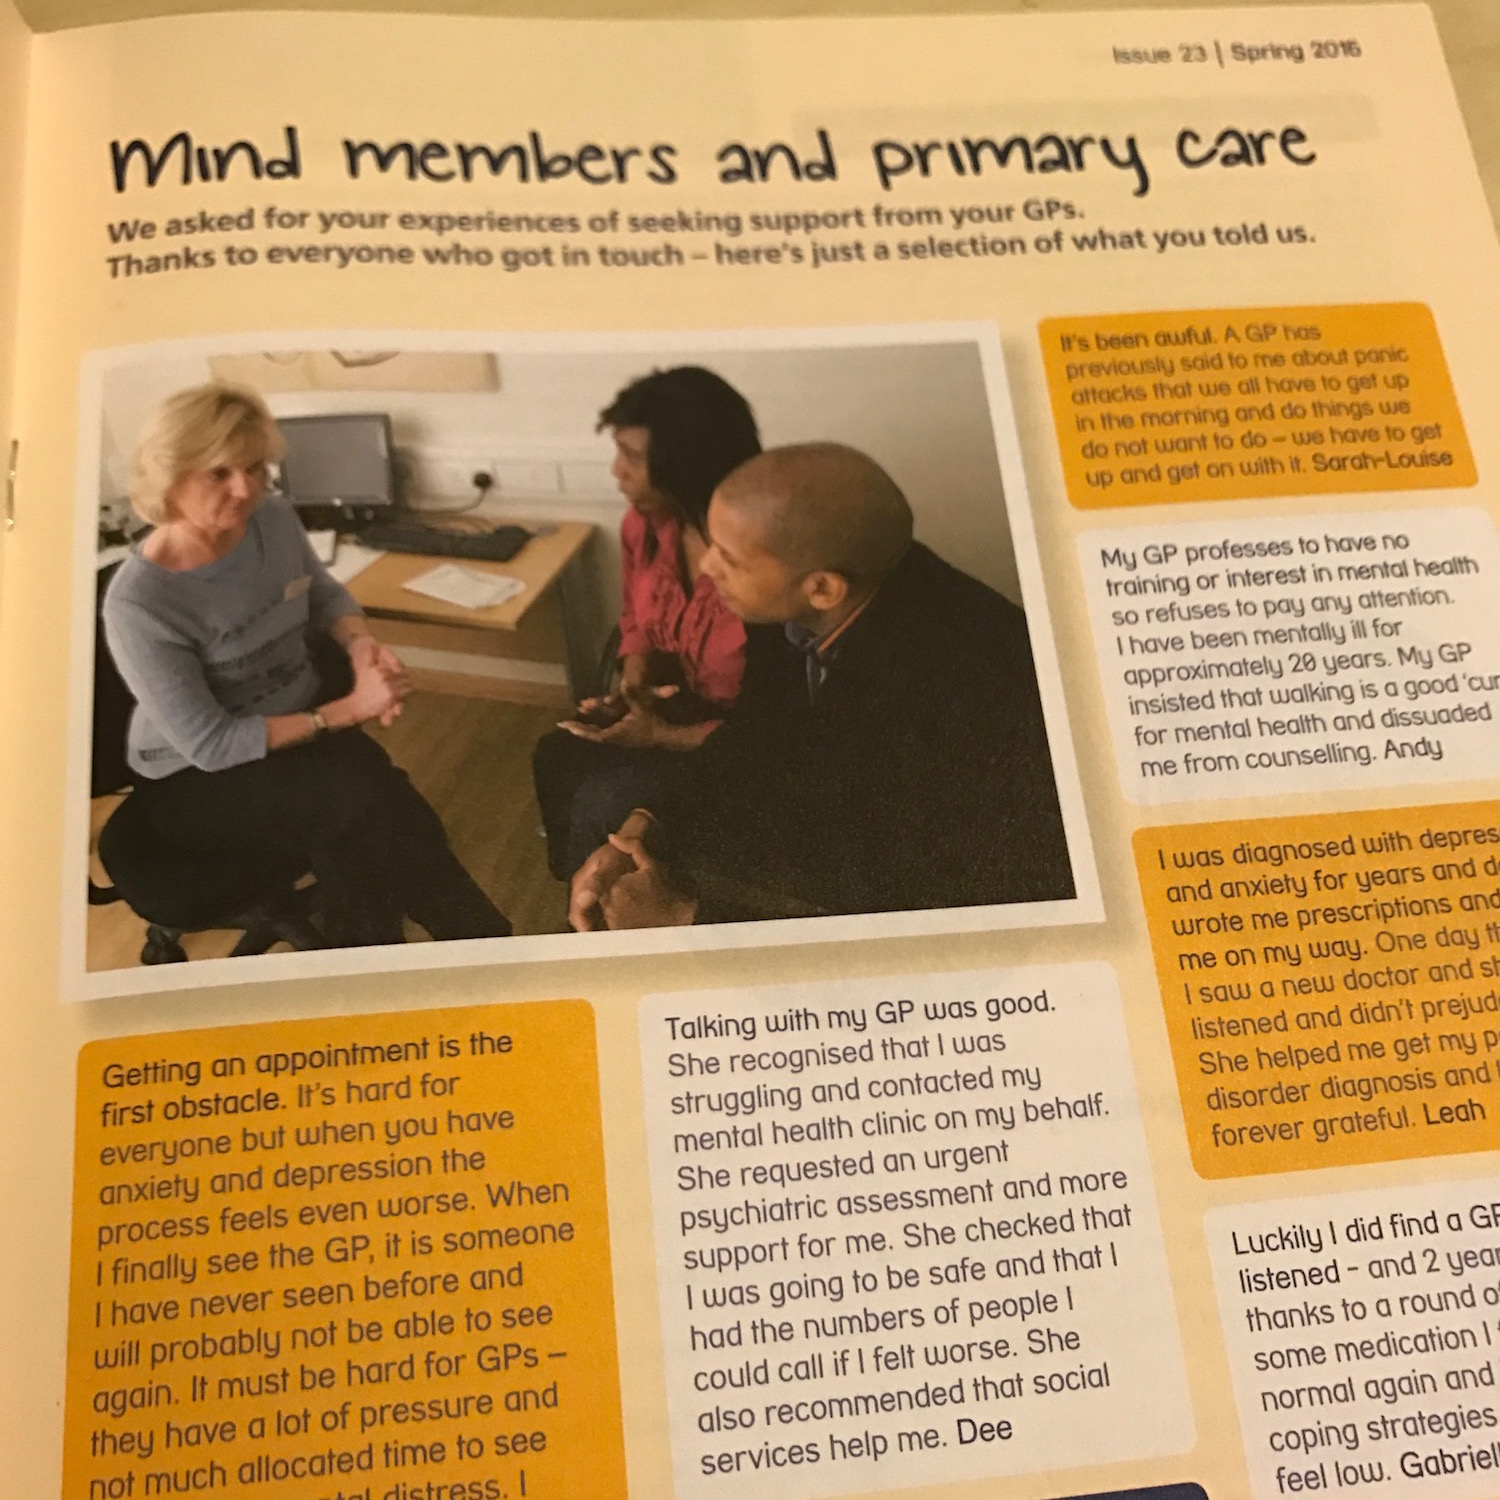 Mind's members share their experiences of discussing mental health with GPs.